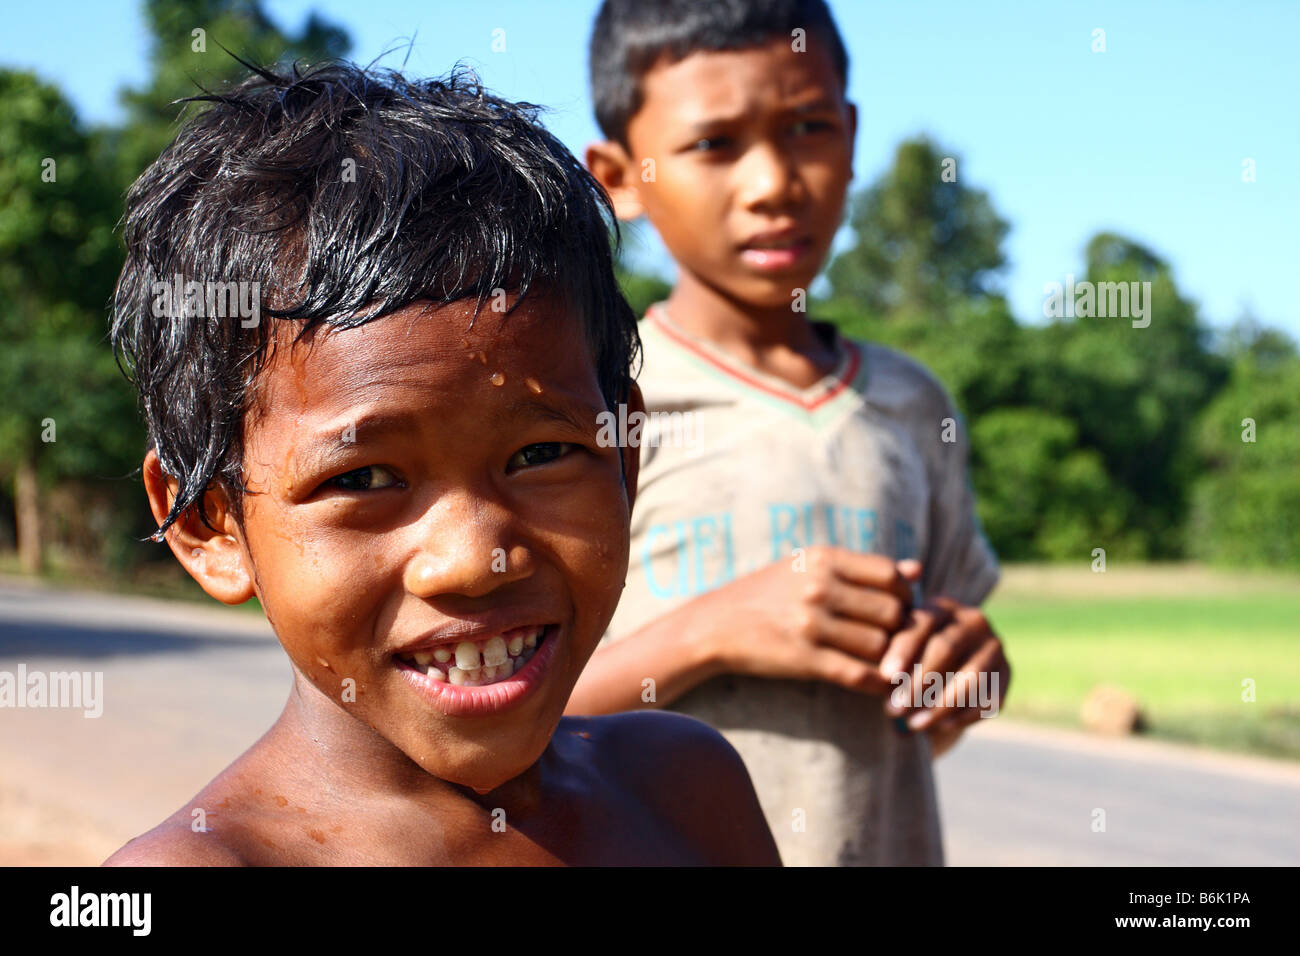 Portrait of a local Cambodian kid with an happy face in the streets arond Angkor Wat, Siem Reap Cambodia Stock Photo